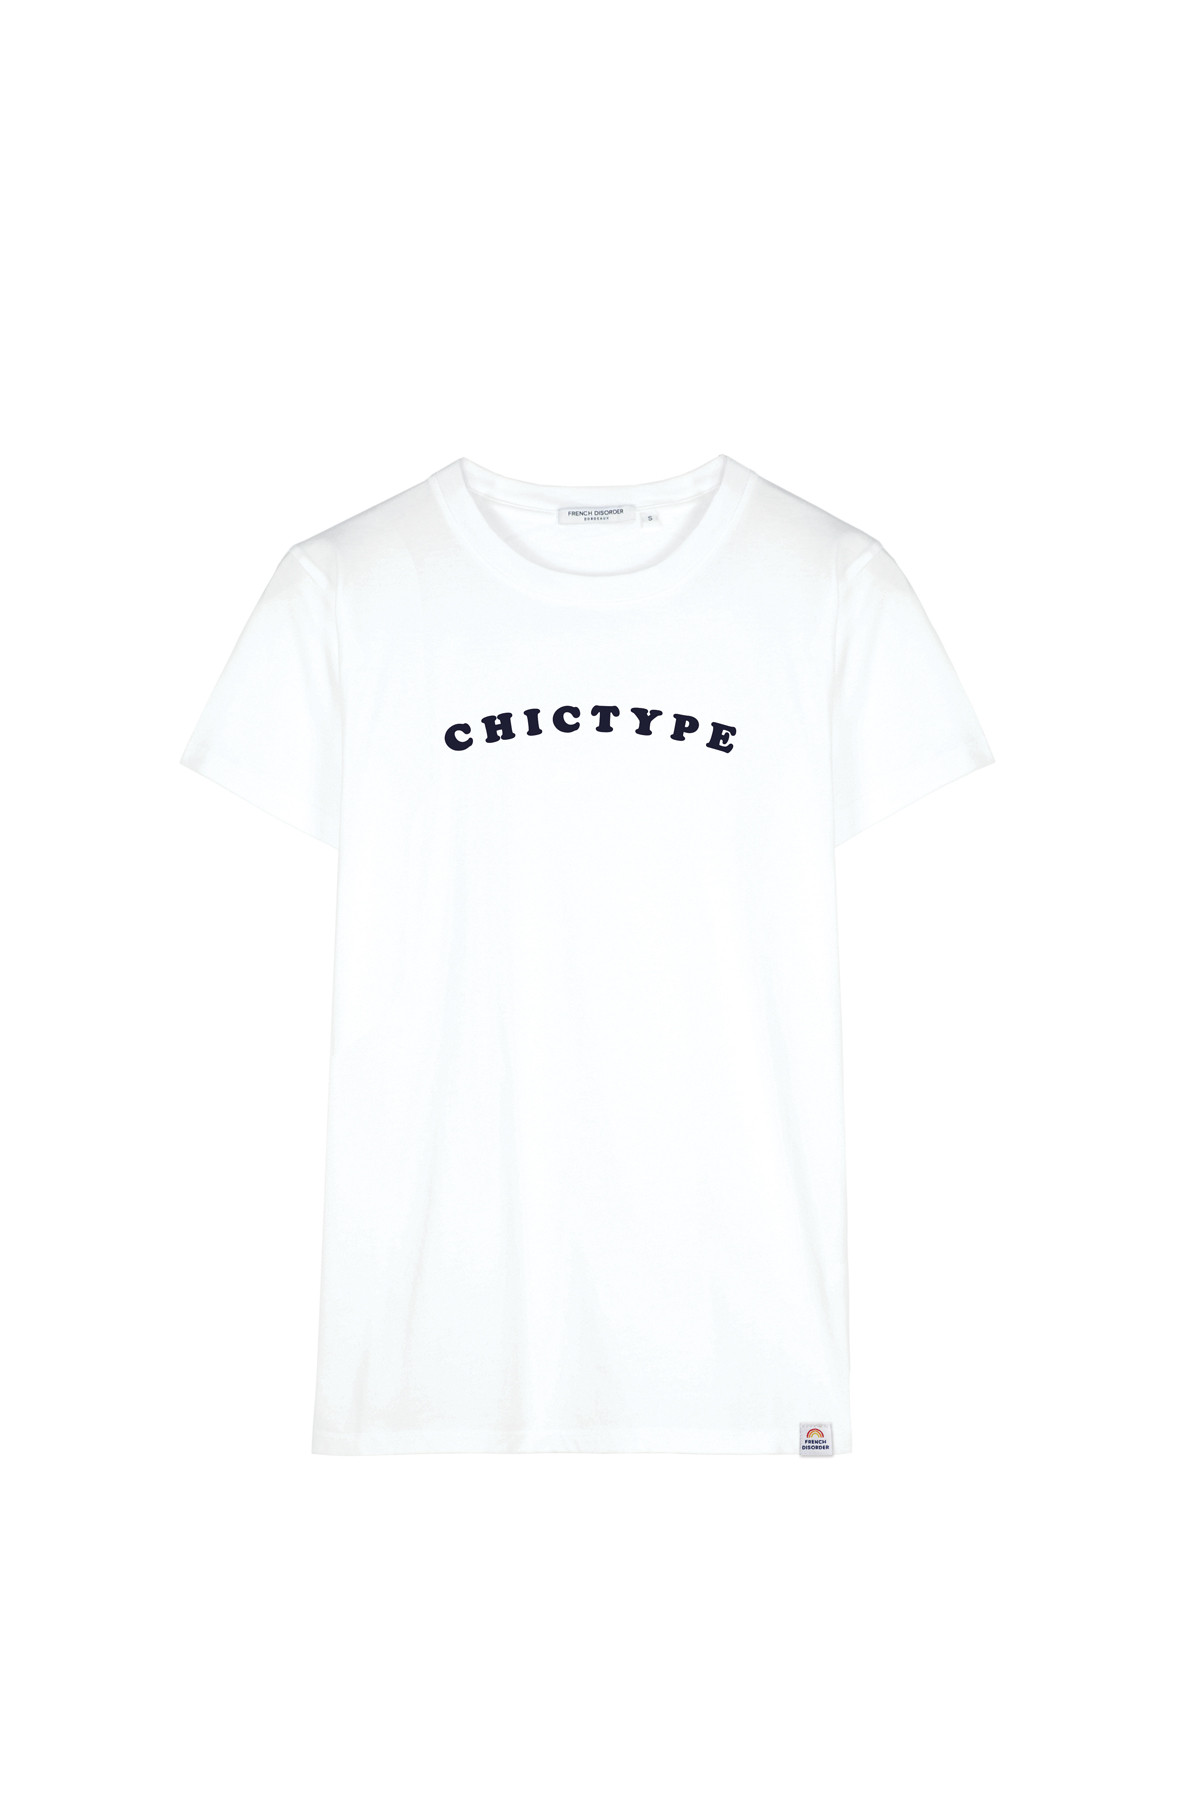 T-shirt CHICTYPE French Disorder